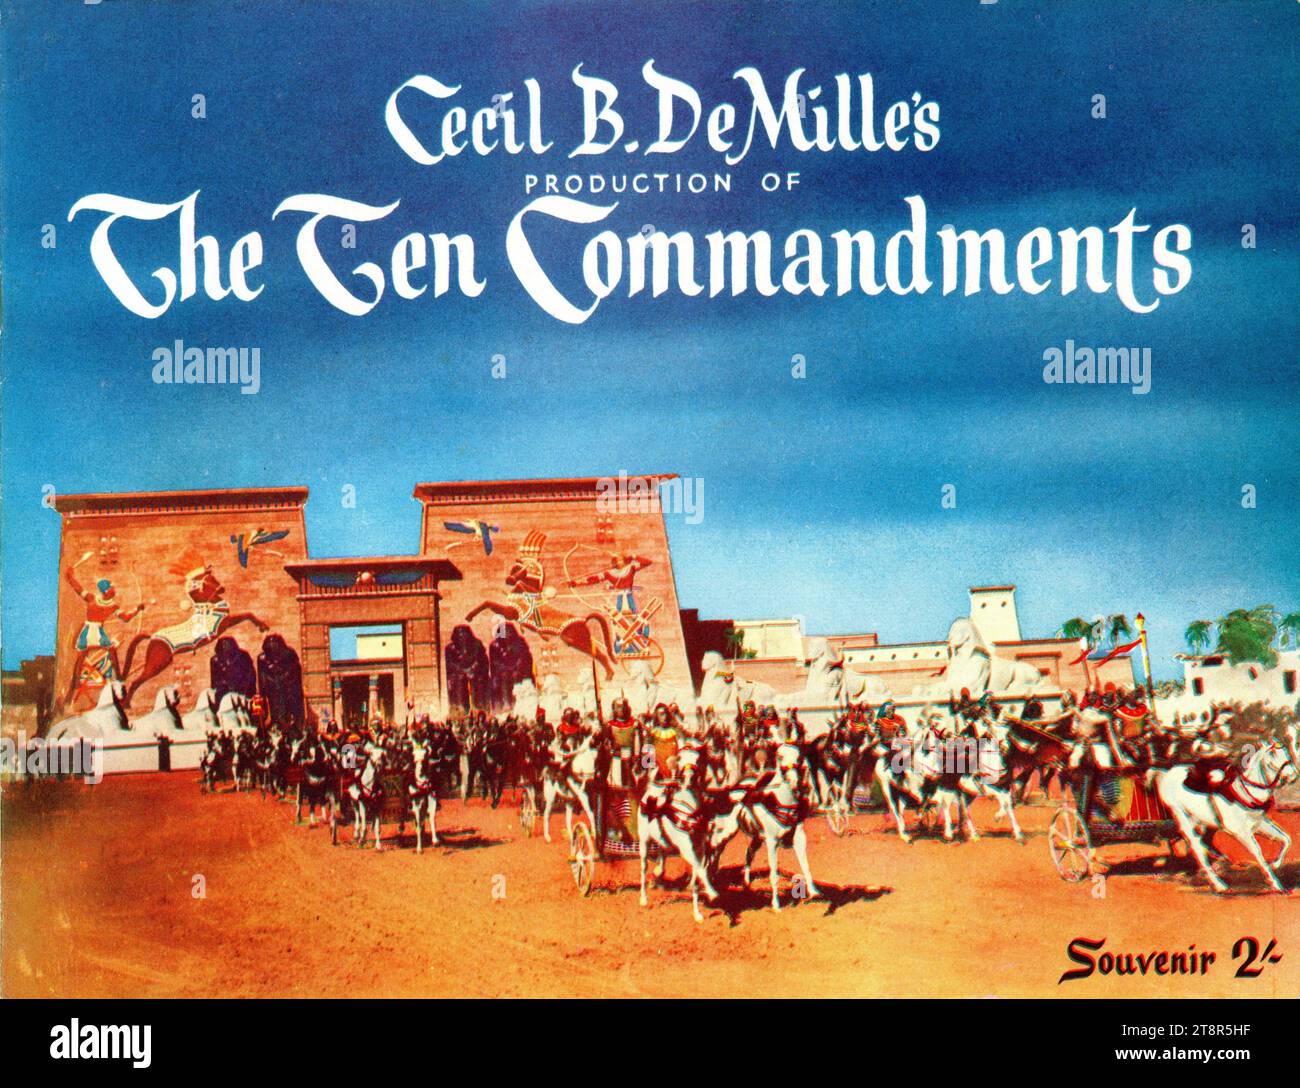 CHARLTON HESTON and YUL BRYNNER in THE TEN COMMANDMENTS 1956 director CECIL B. DeMILLE music Elmer Bernstein Motion Picture Associates / Paramount Pictures Stock Photo